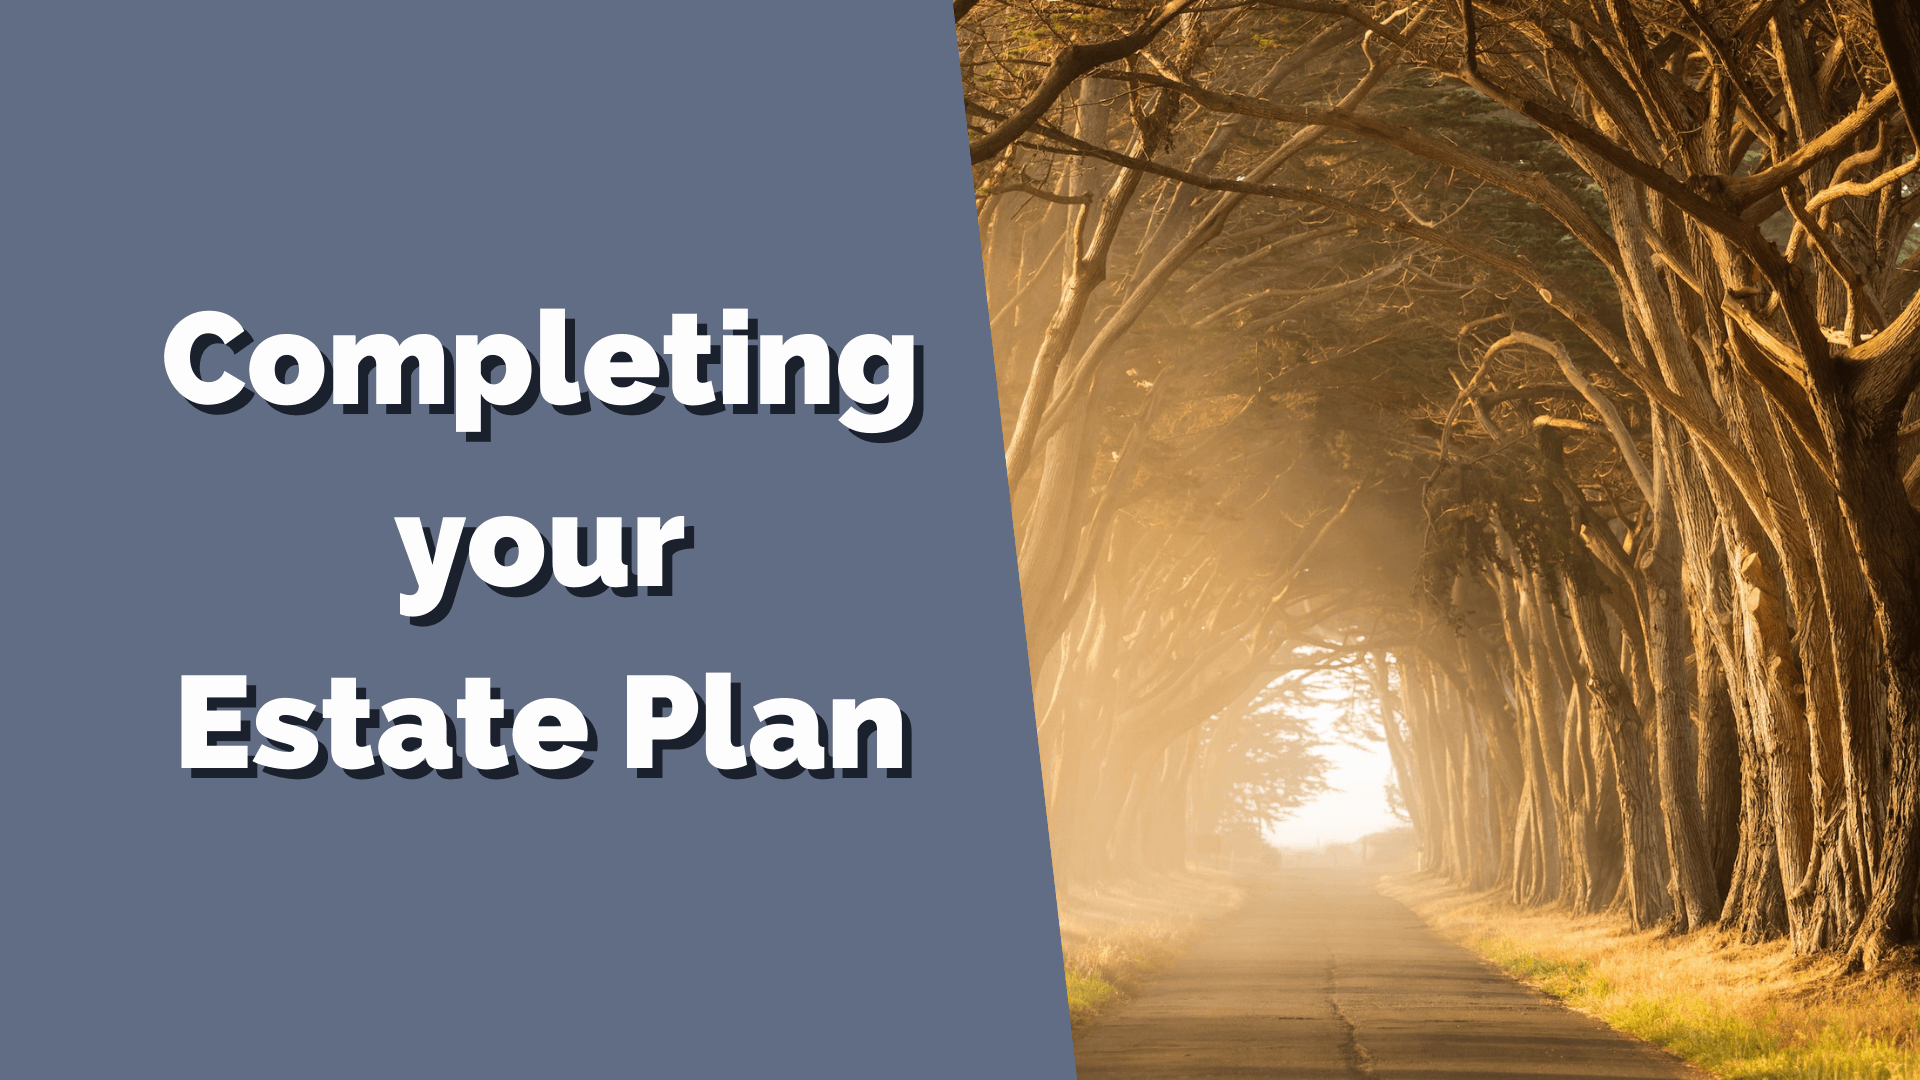 What are the next steps to complete my estate plan?